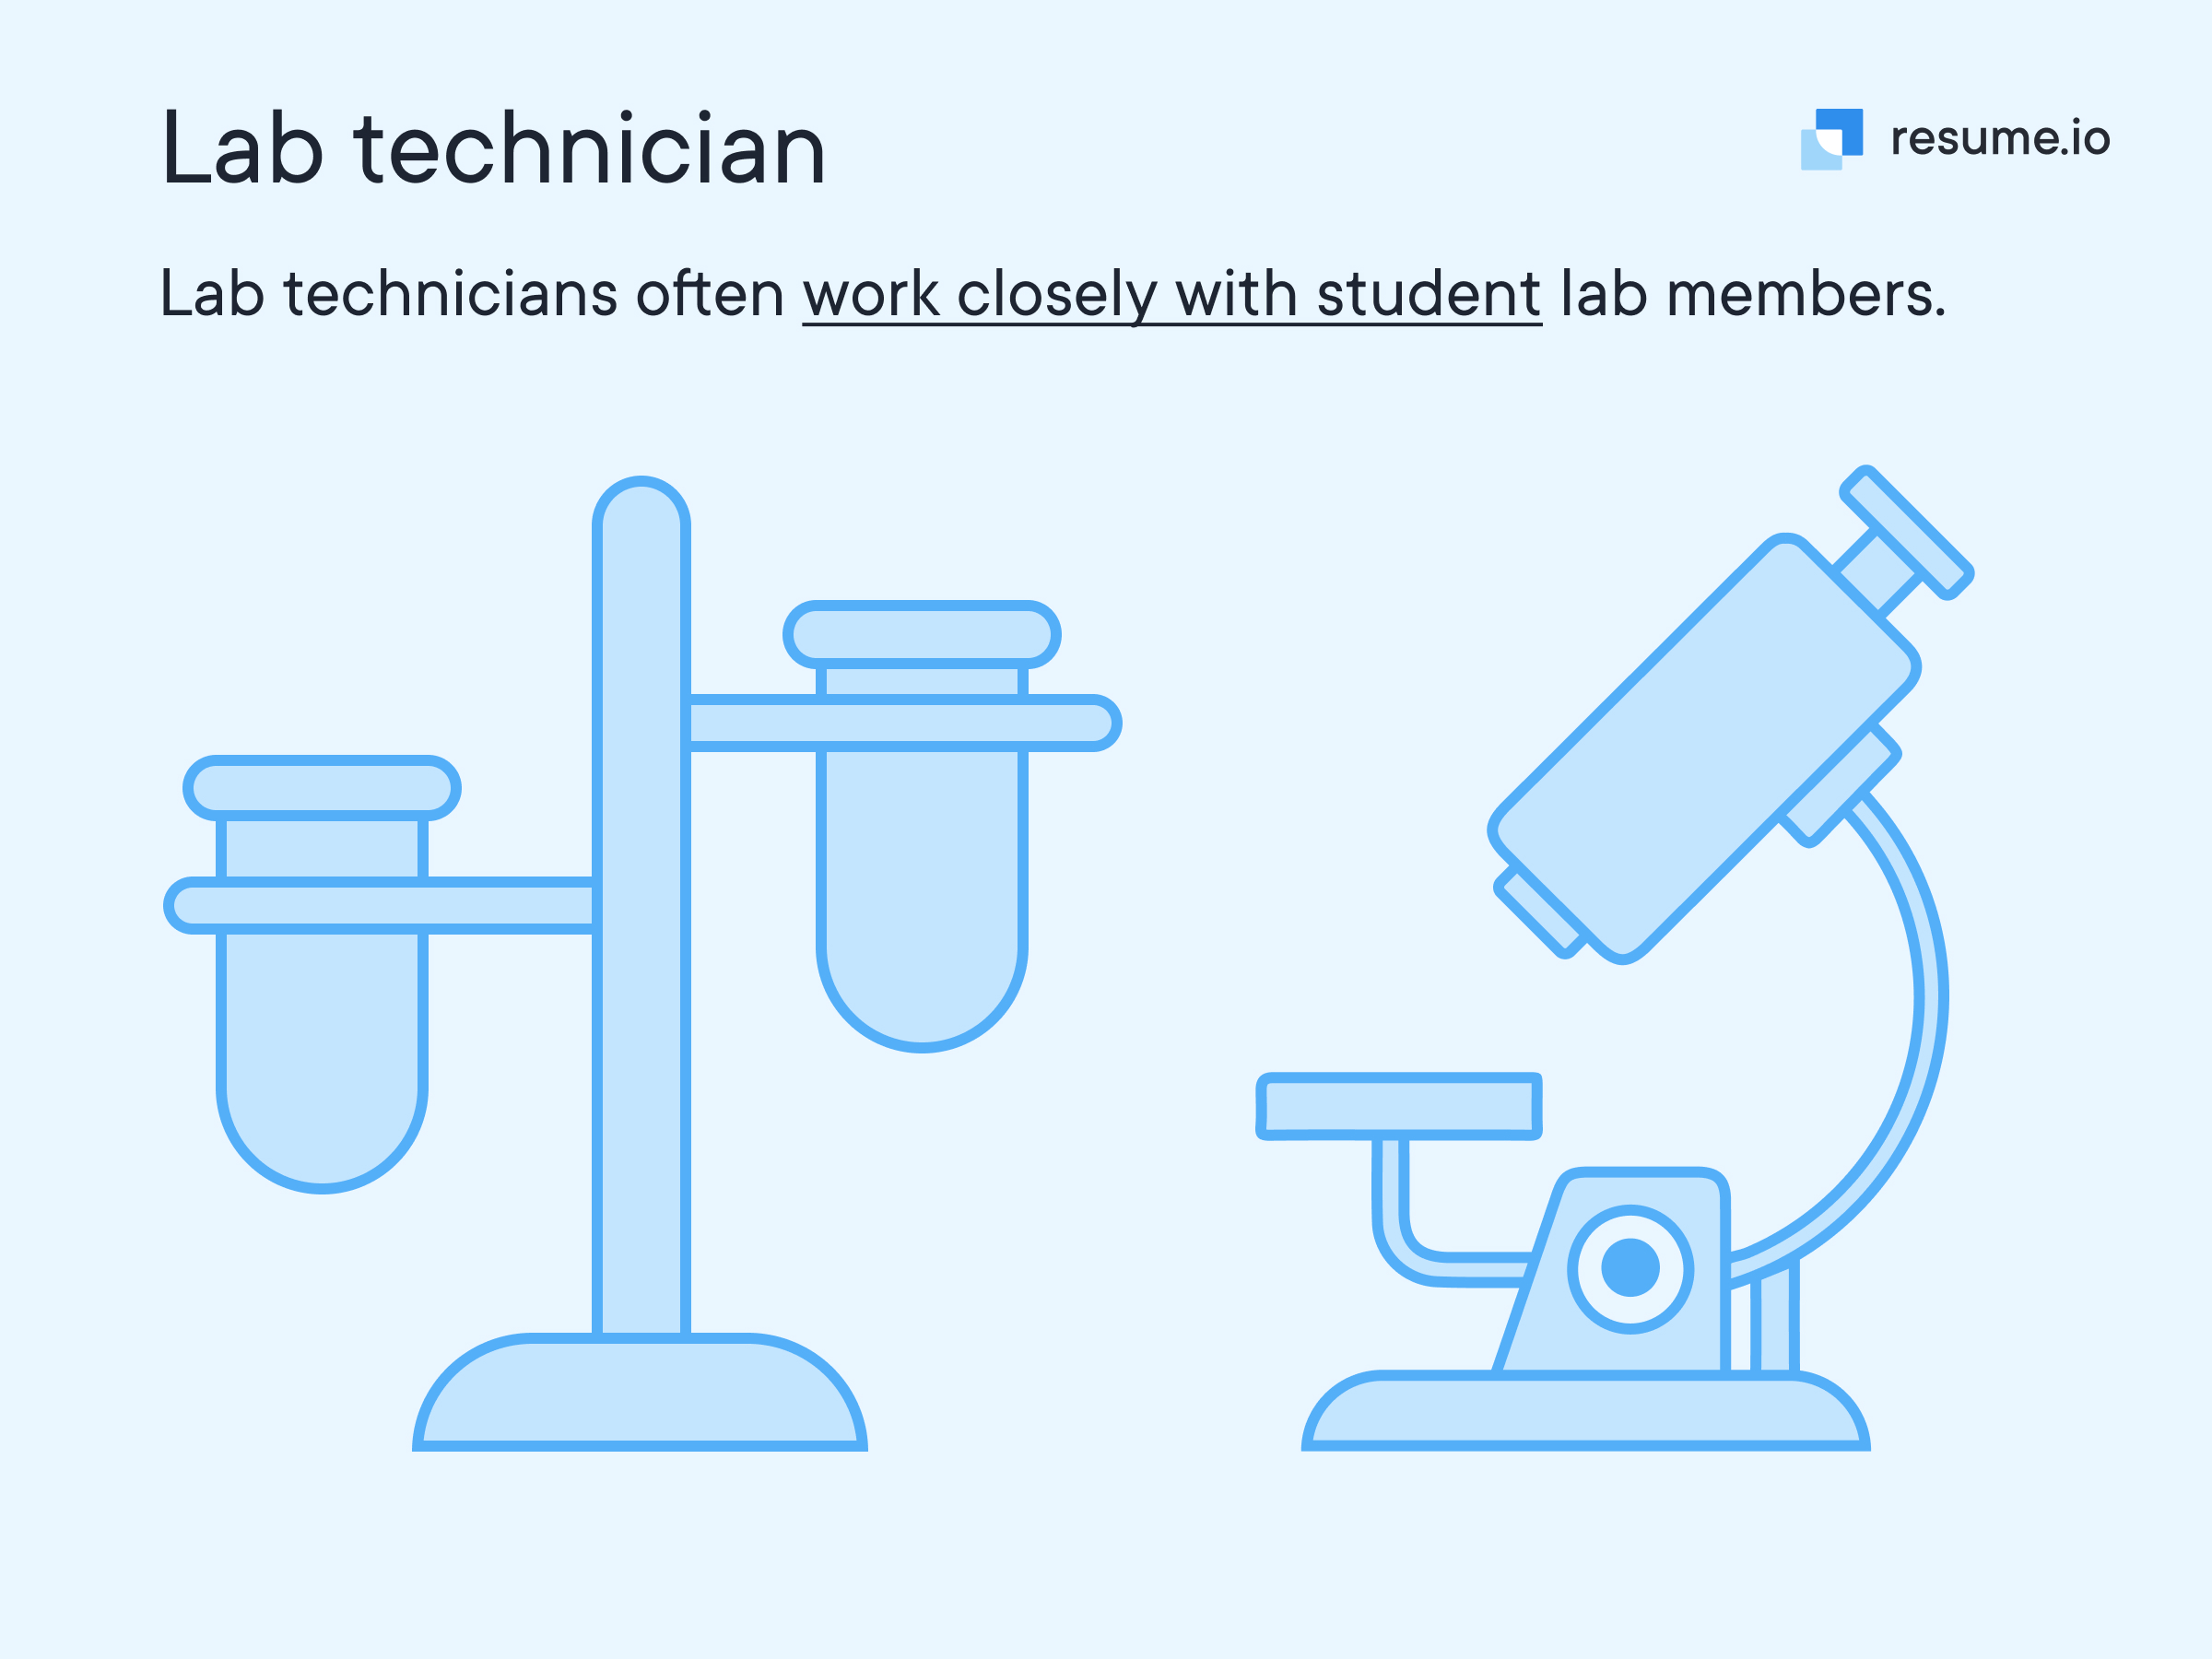 Lab technicians work closely with student lab members